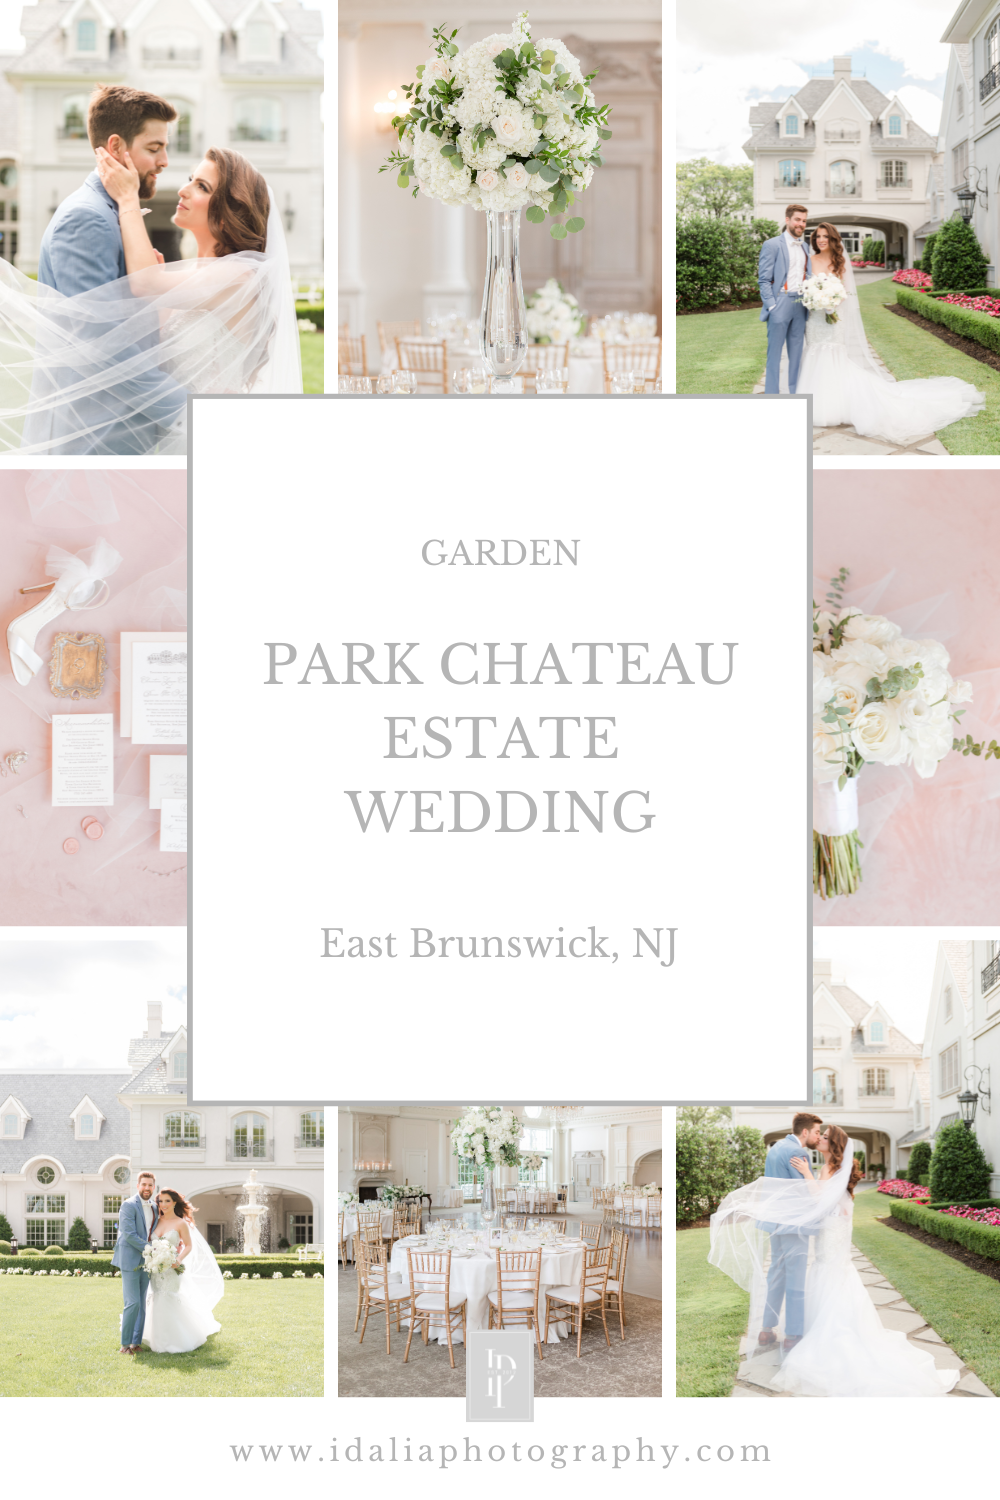 Summer Park Chateau Estate Wedding with apricot and cornflower blue details photographed by NJ wedding photographer Idalia Photography